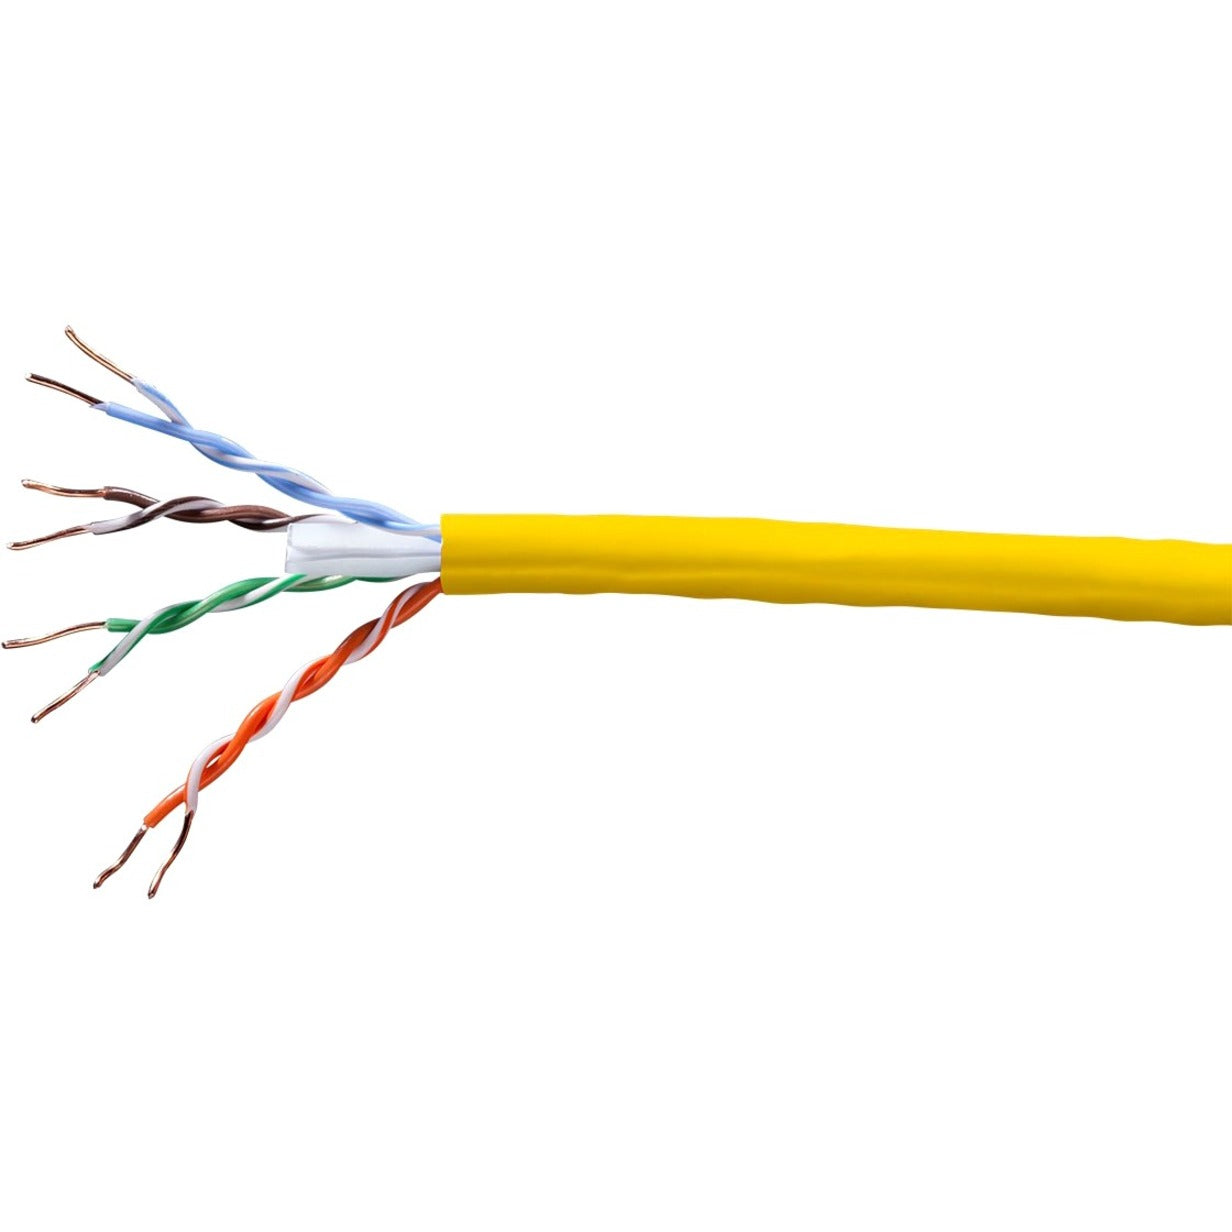 Monoprice 13740 Cat. 5e UTP Network Cable, 1000 ft, Yellow